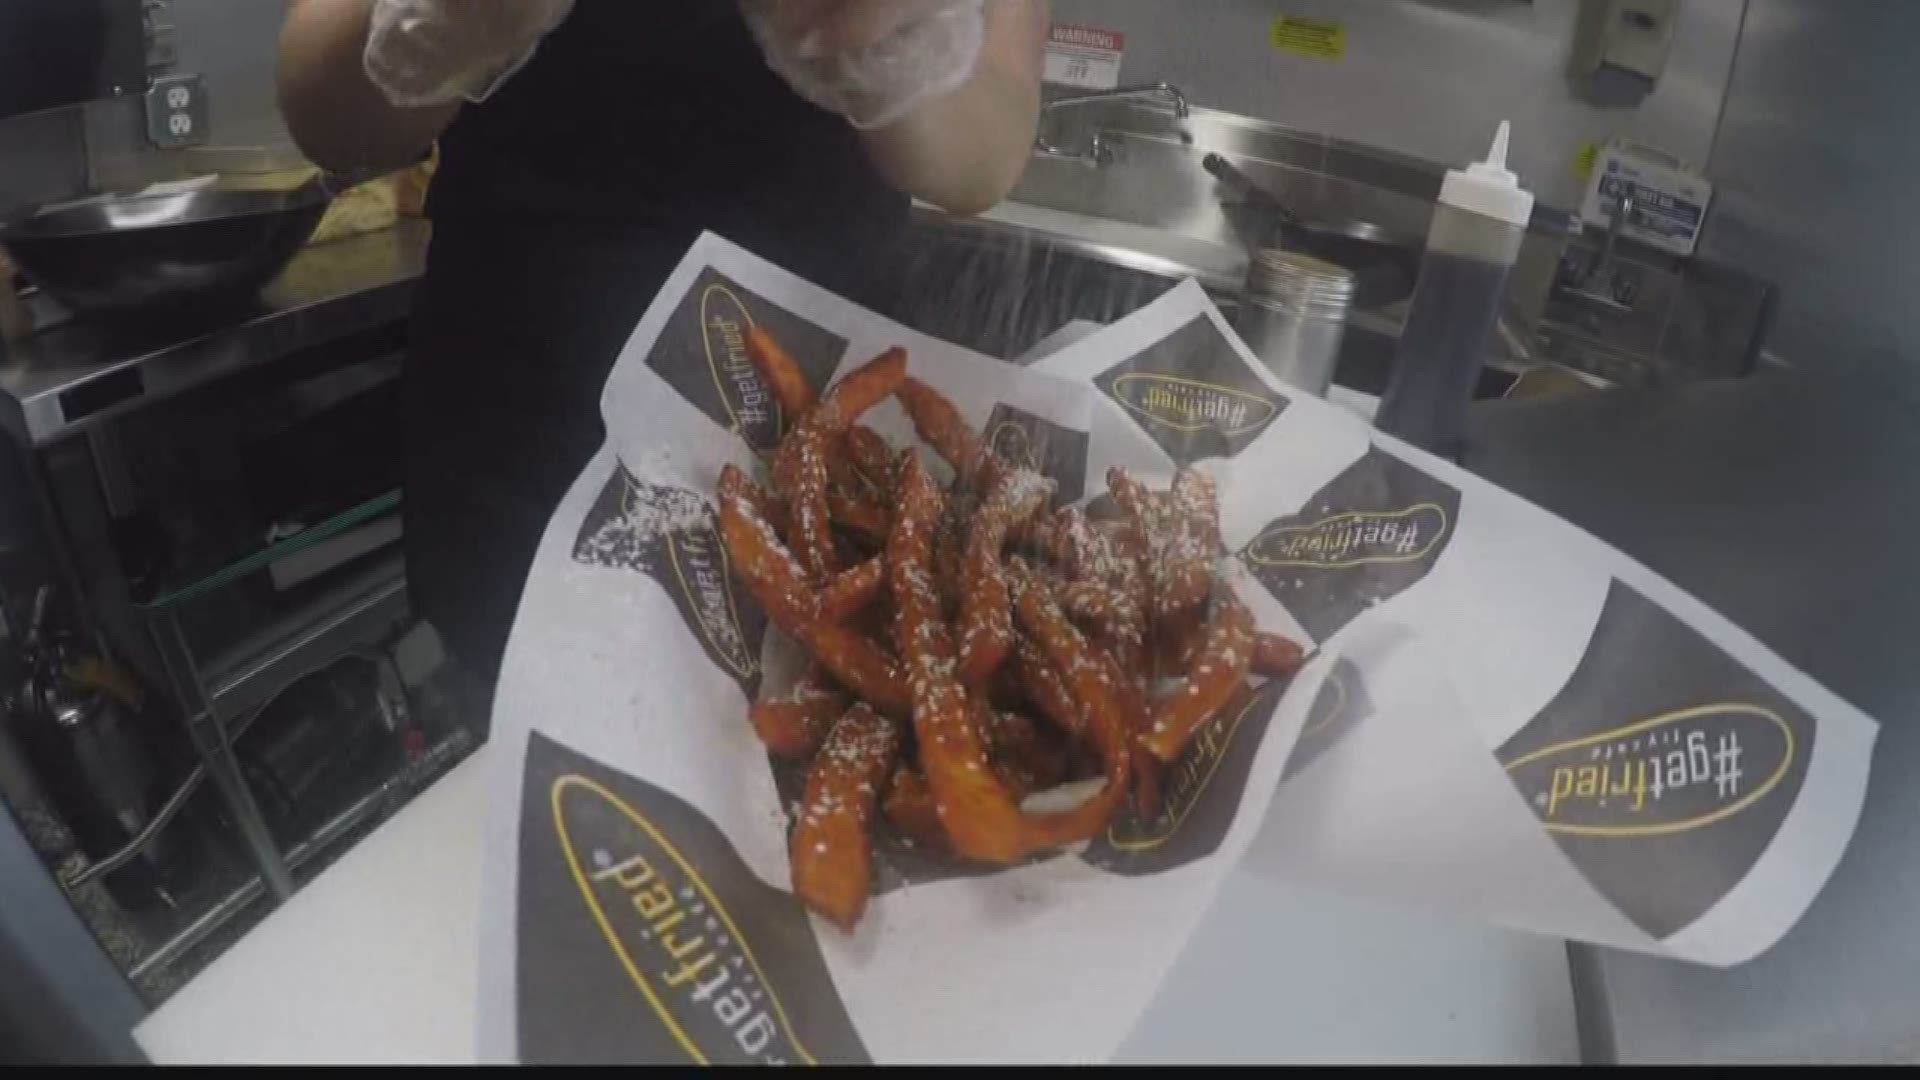 Daybreak's Stephanie Barnes takes us to a french fried food truck to give us a preview of what to expect this year at the Taste of Buffalo